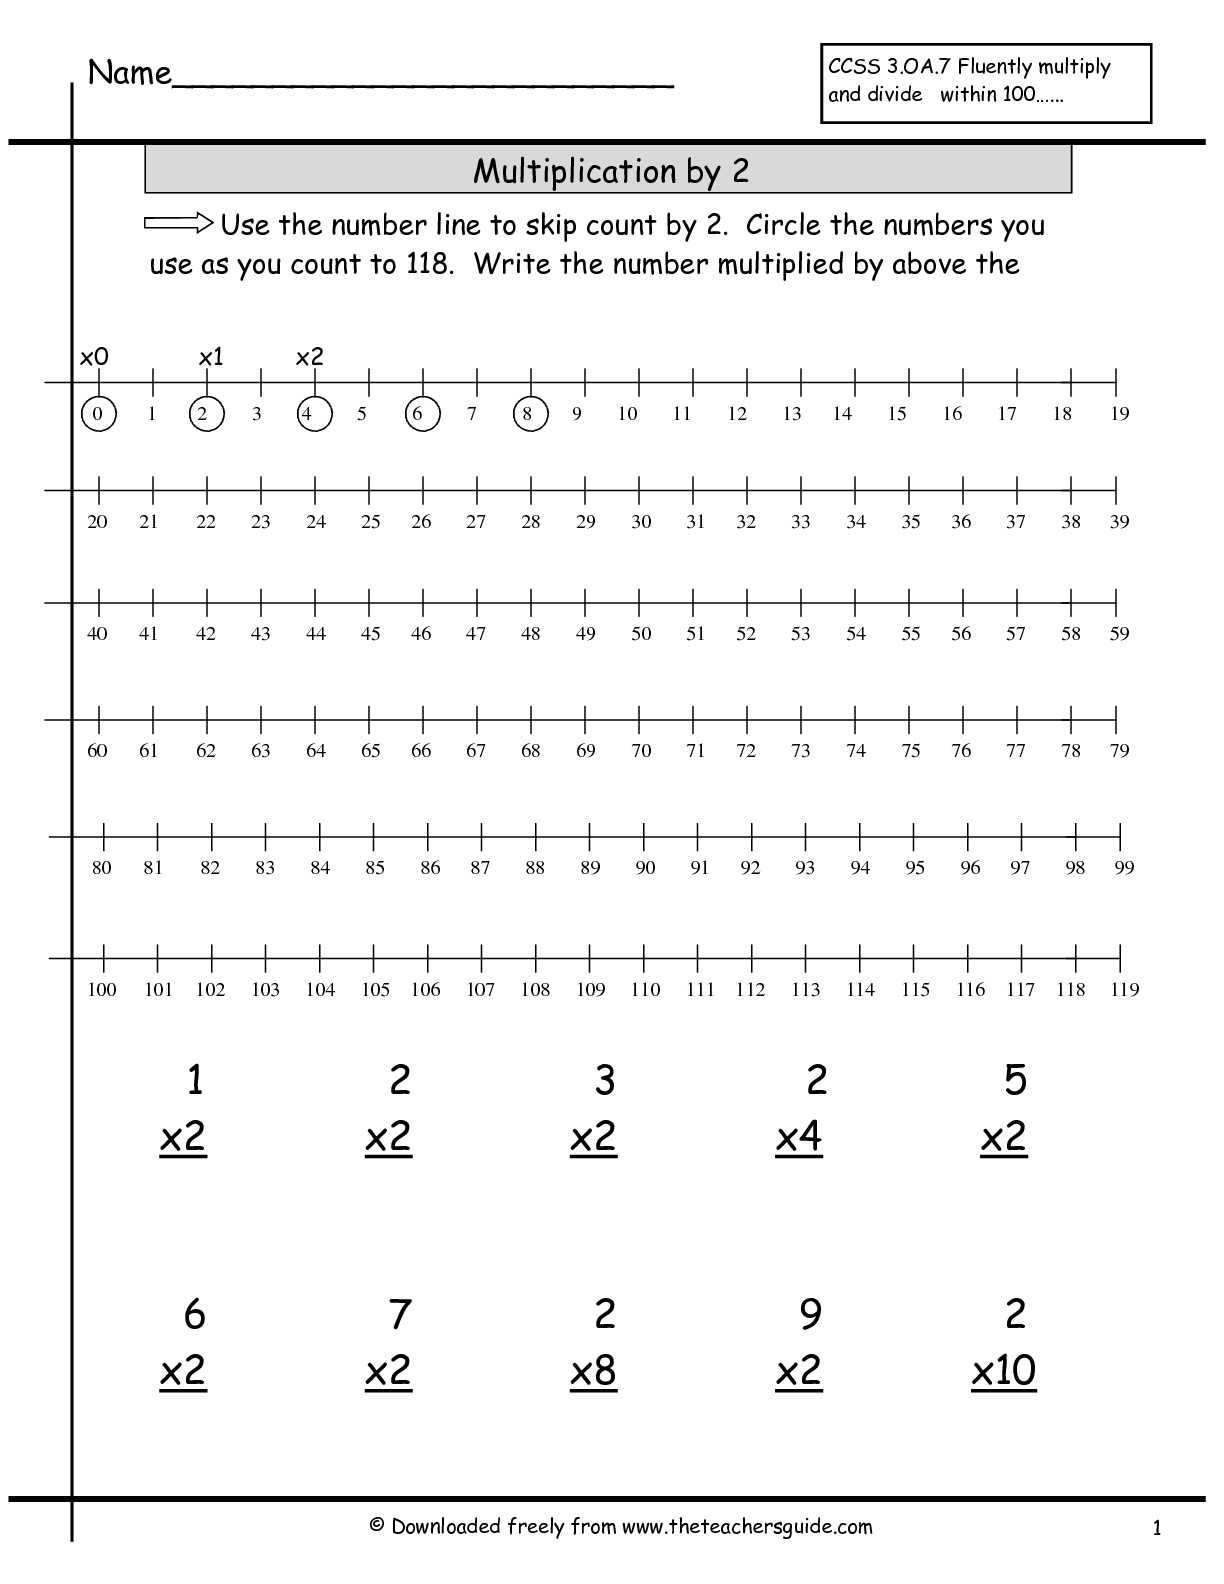 multiplying-by-0-1-and-2-worksheets